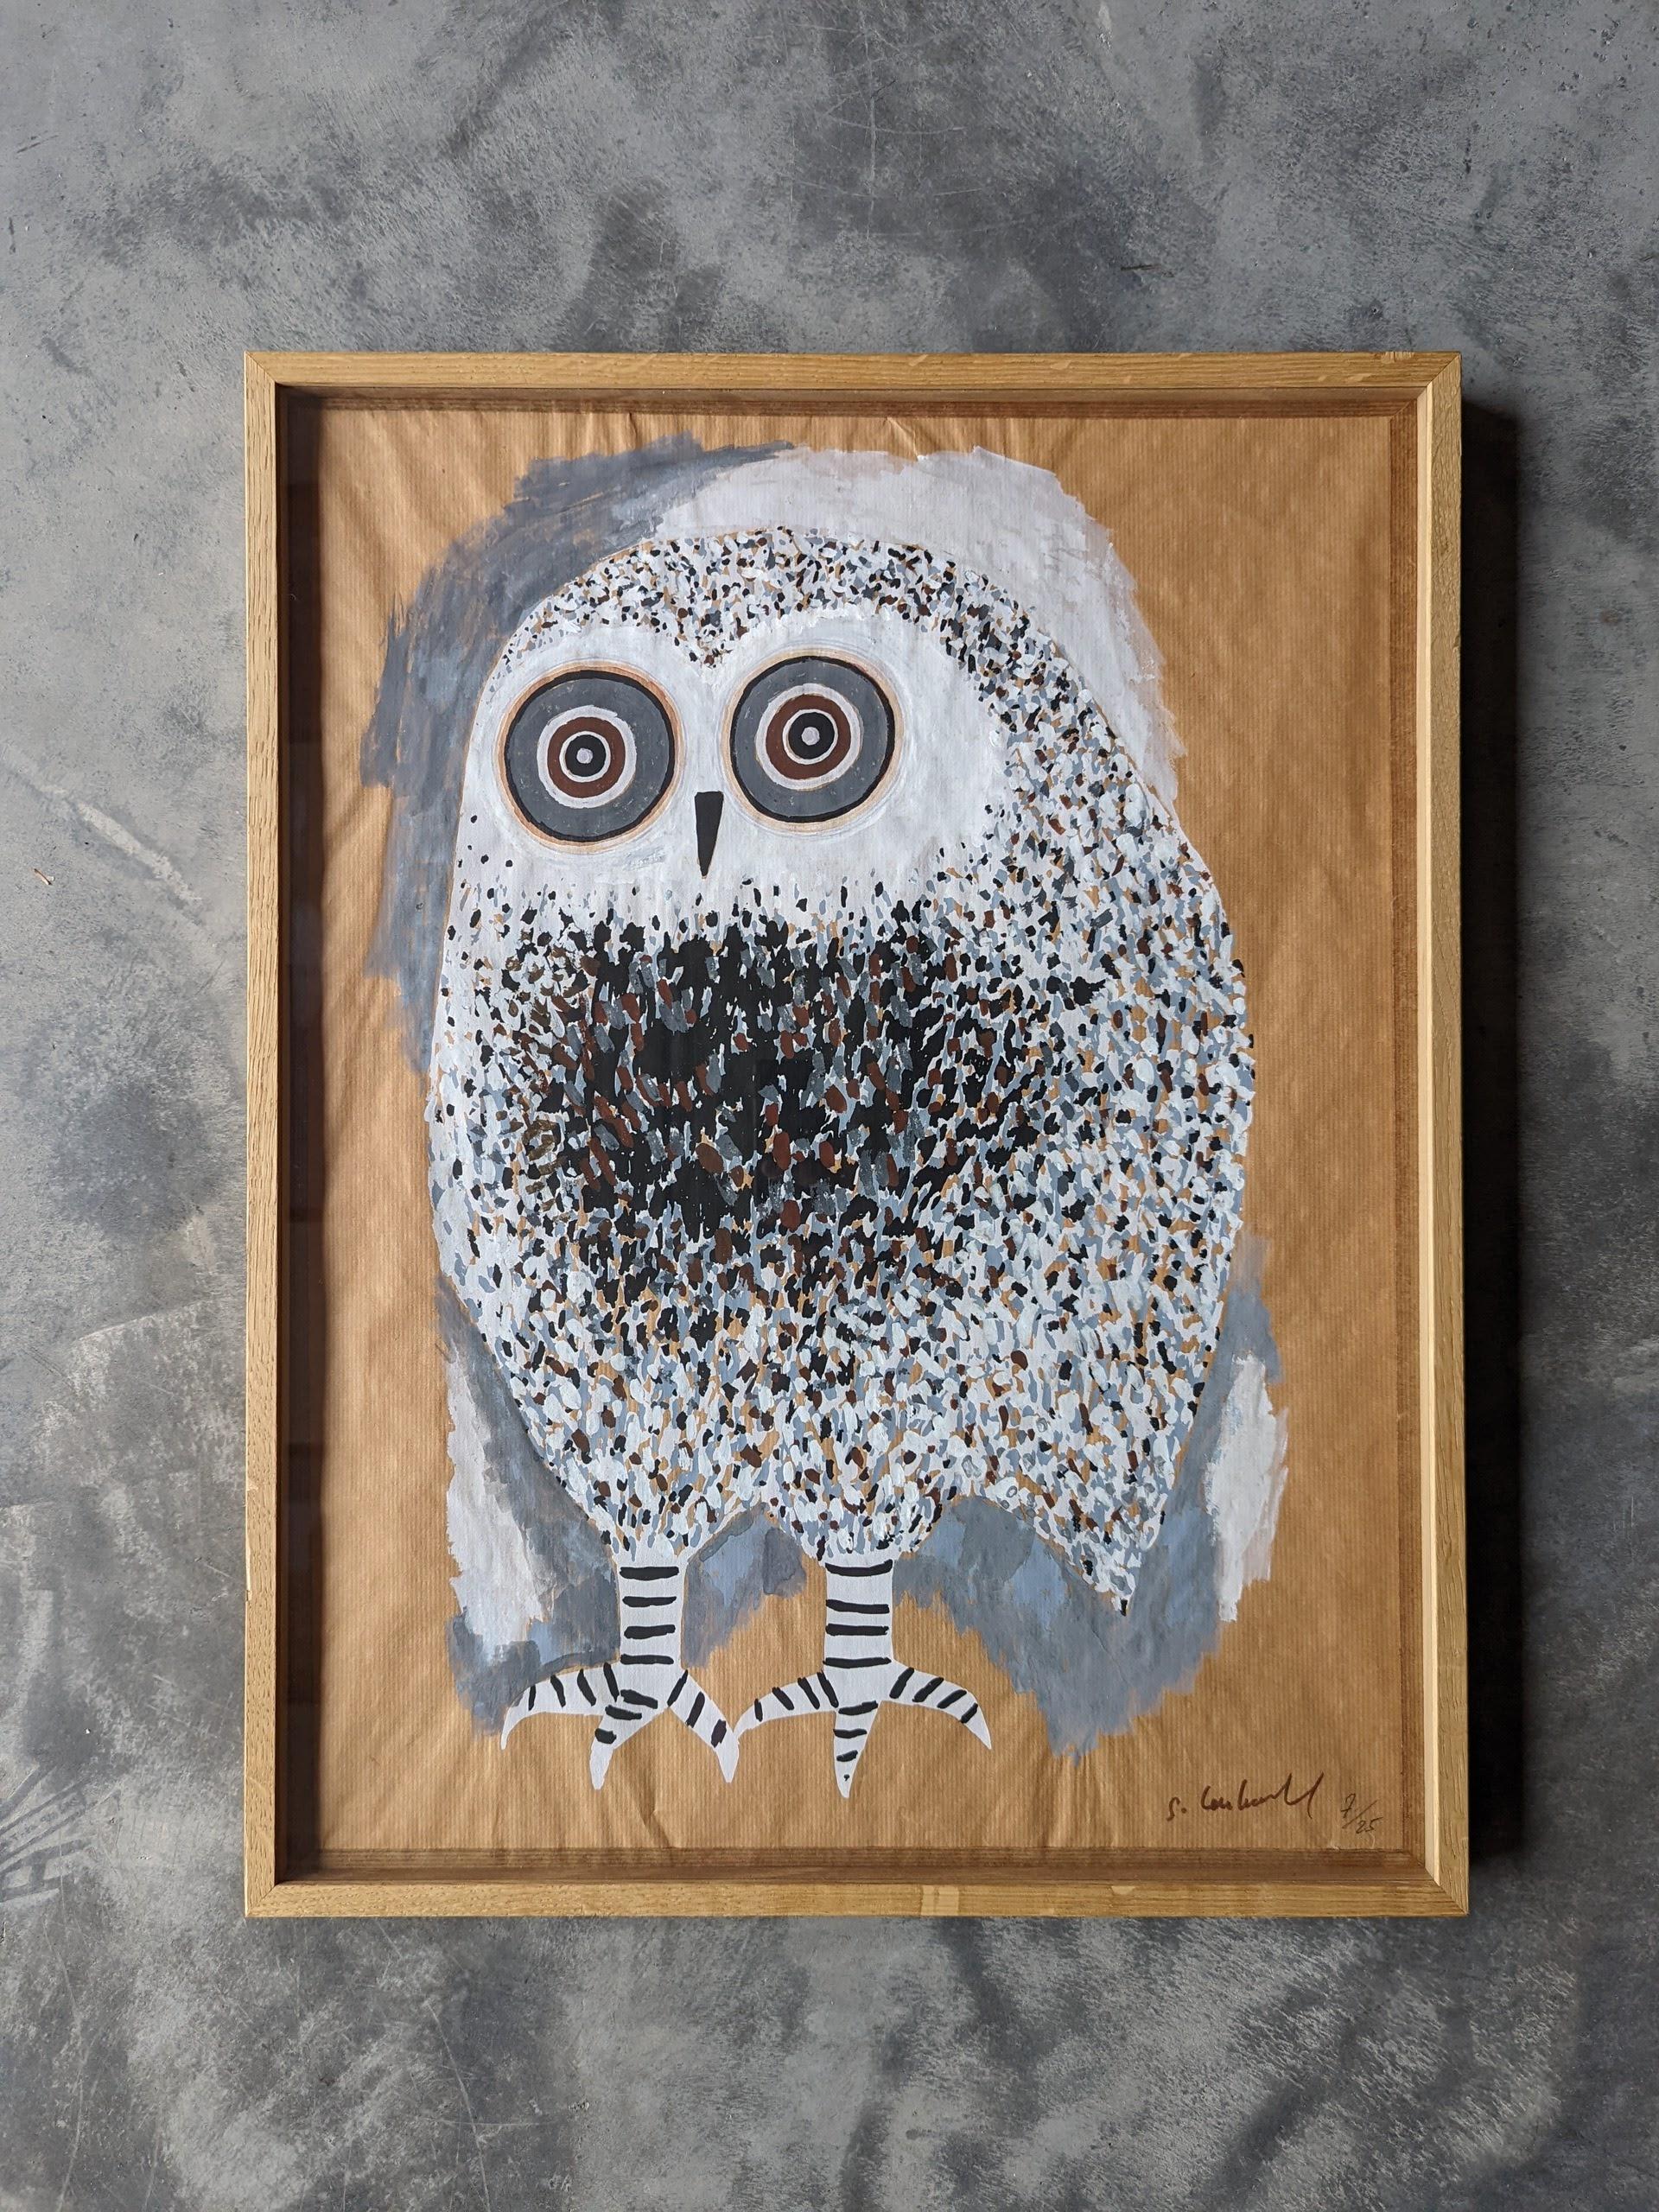 Guidette Carbonell's owl, painting.
Signed Gouache on paper circa 1975.
French artist Guidette Carbonell (1910-2008) expressed herself in different ways : sculptures, ceramics, tapestries and paints. 
Birds, and owls in particular, were one of his